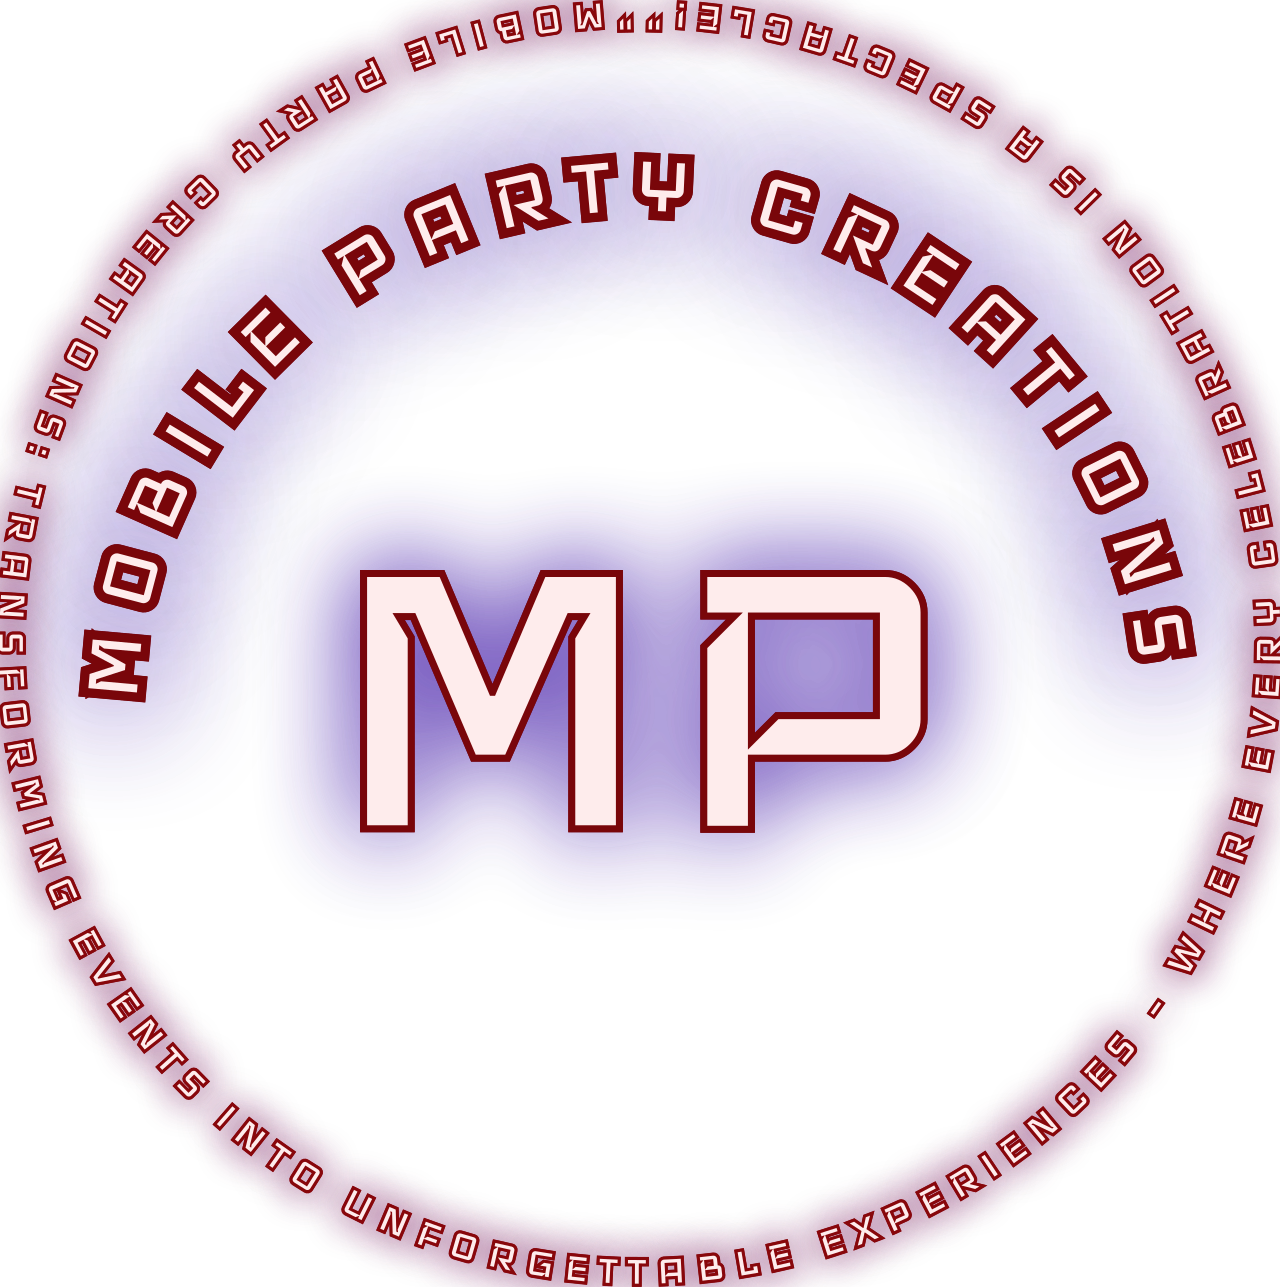 MOBILE PARTY CREATIONS 's logo